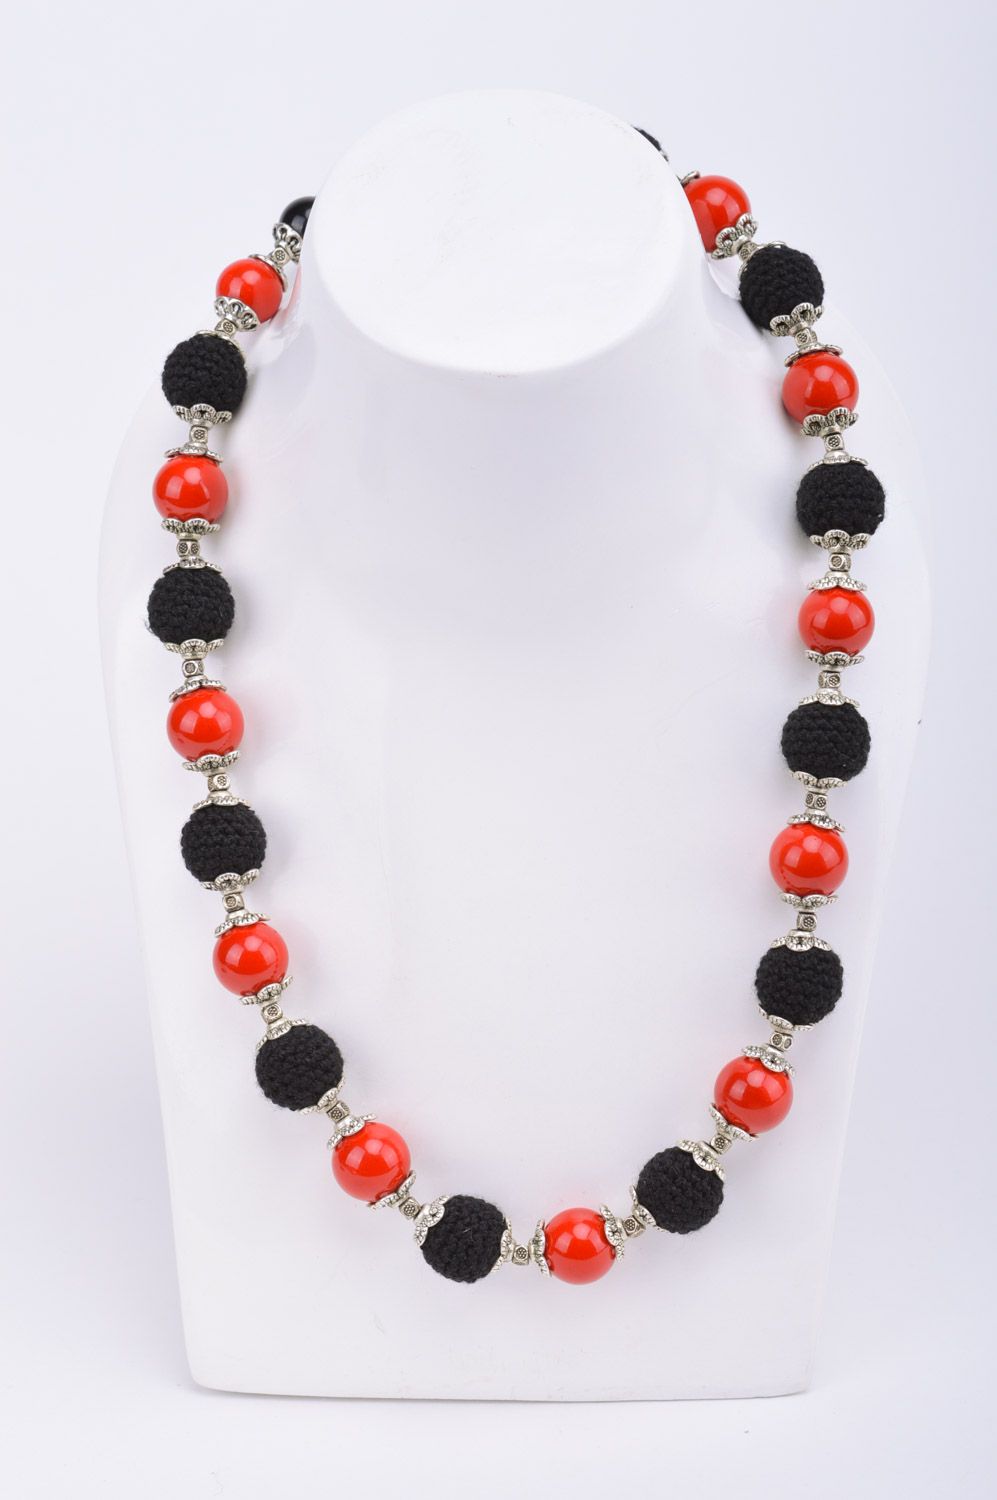 Handmade bright long necklace with crochet over beads of red and black colors photo 1